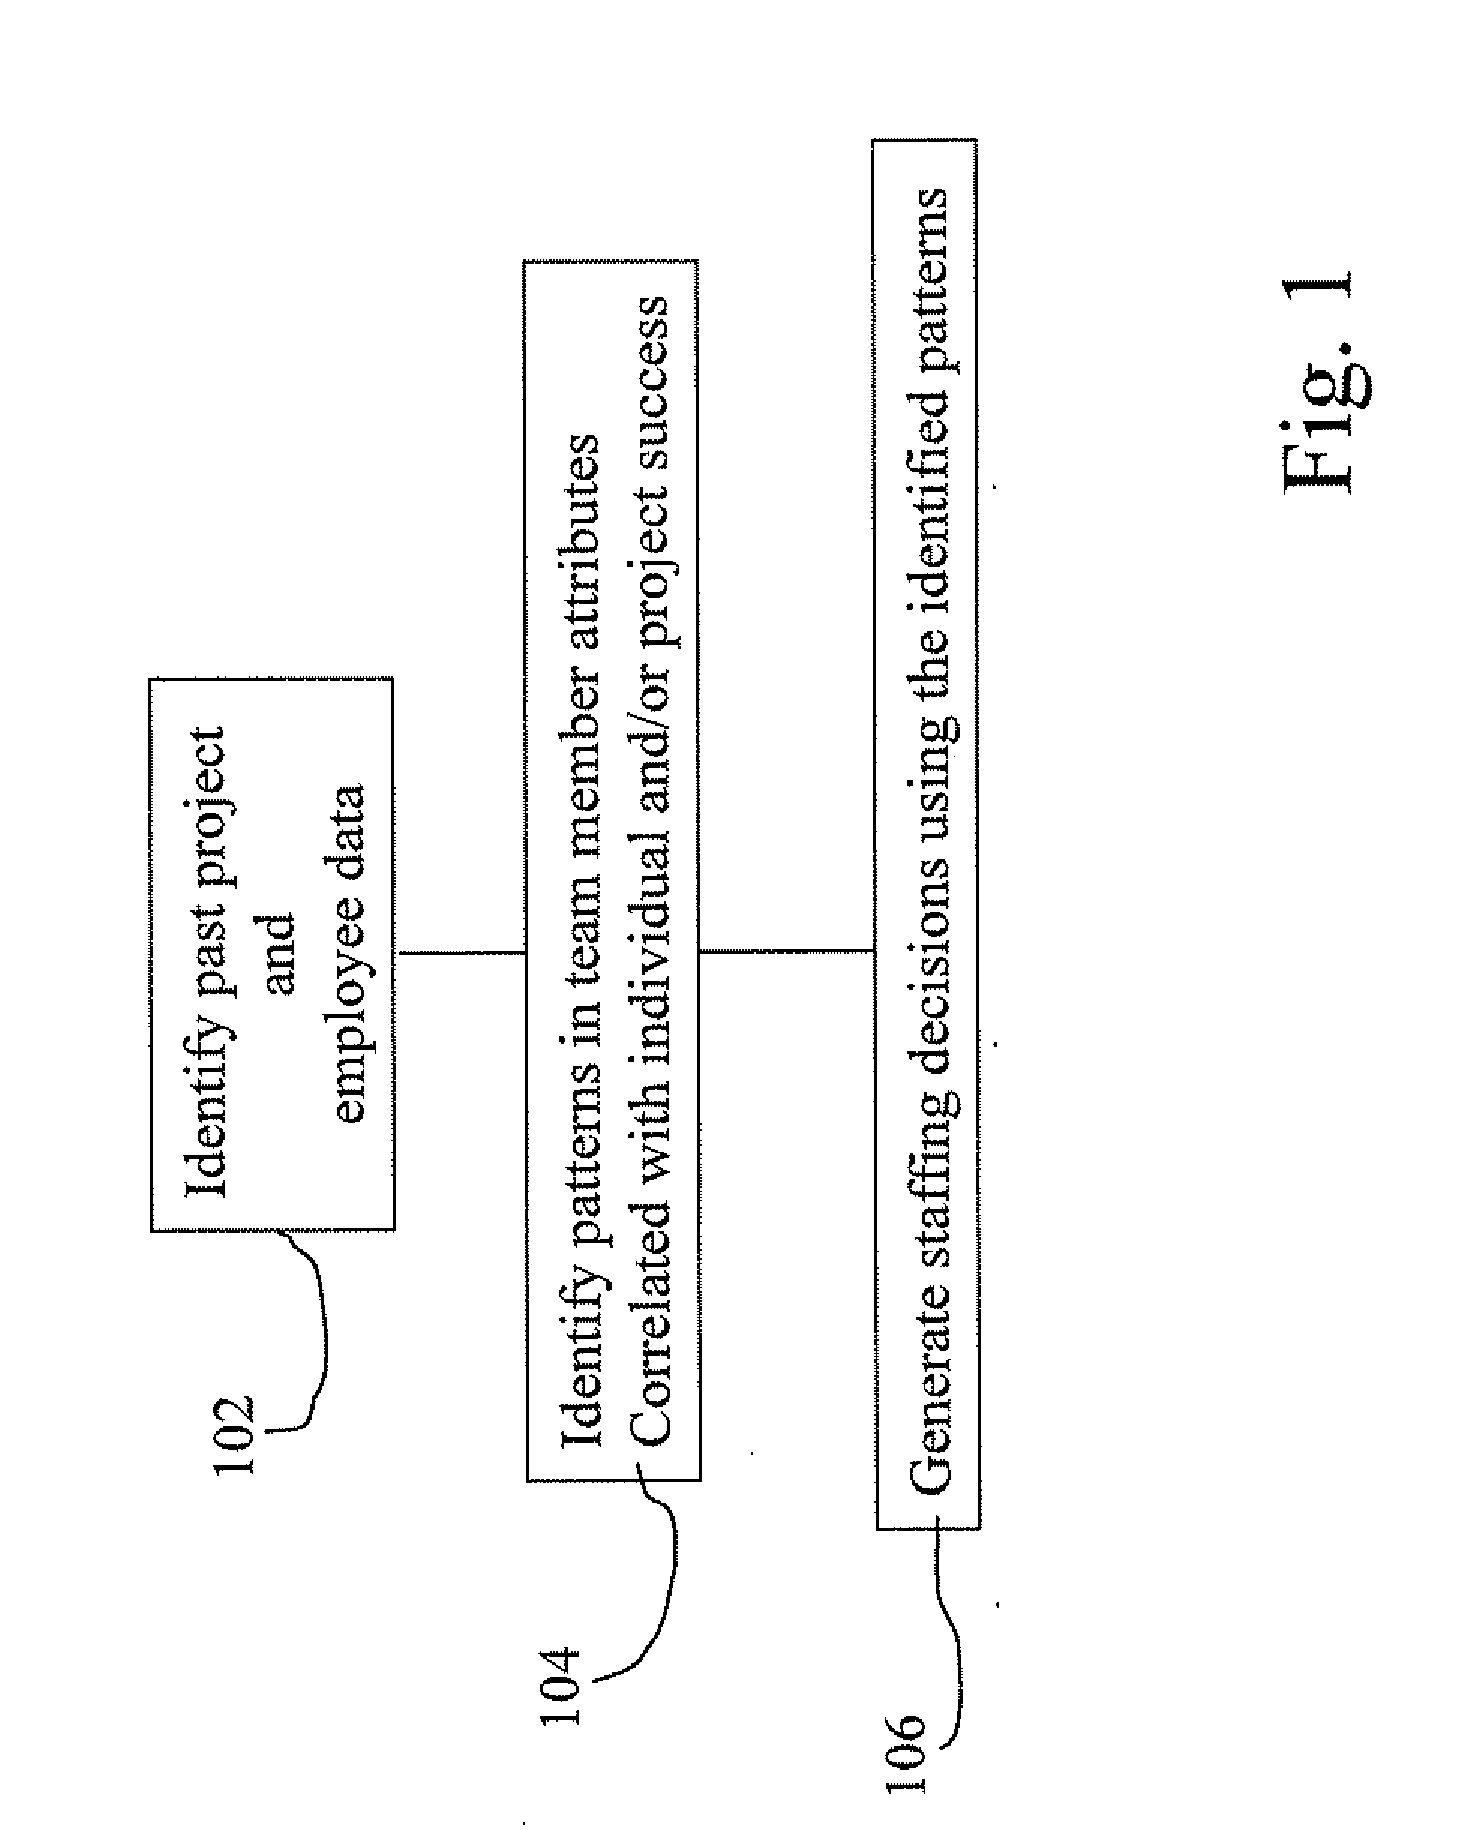 Method and apparatus for identifying and using historical work patterns to build/use high-performance project teams subject to constraints